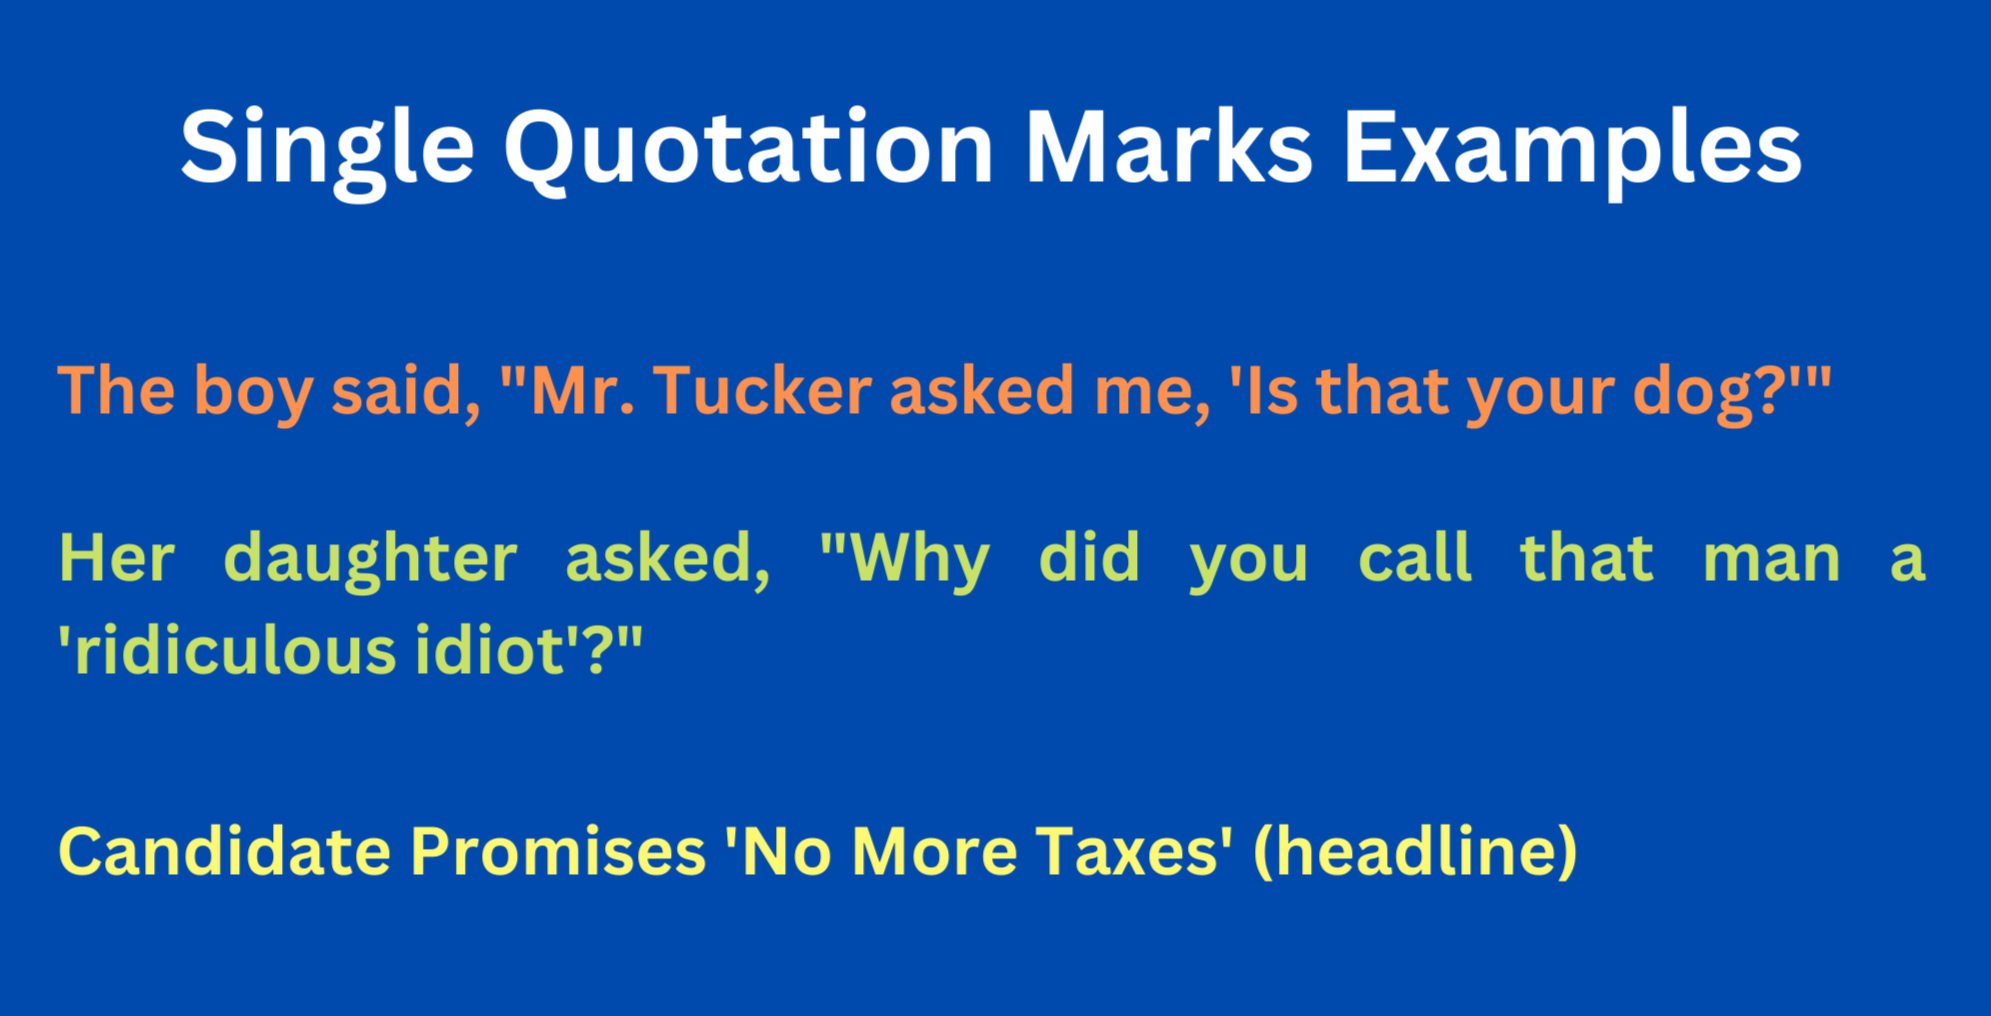 How to Use Single Quotation Marks